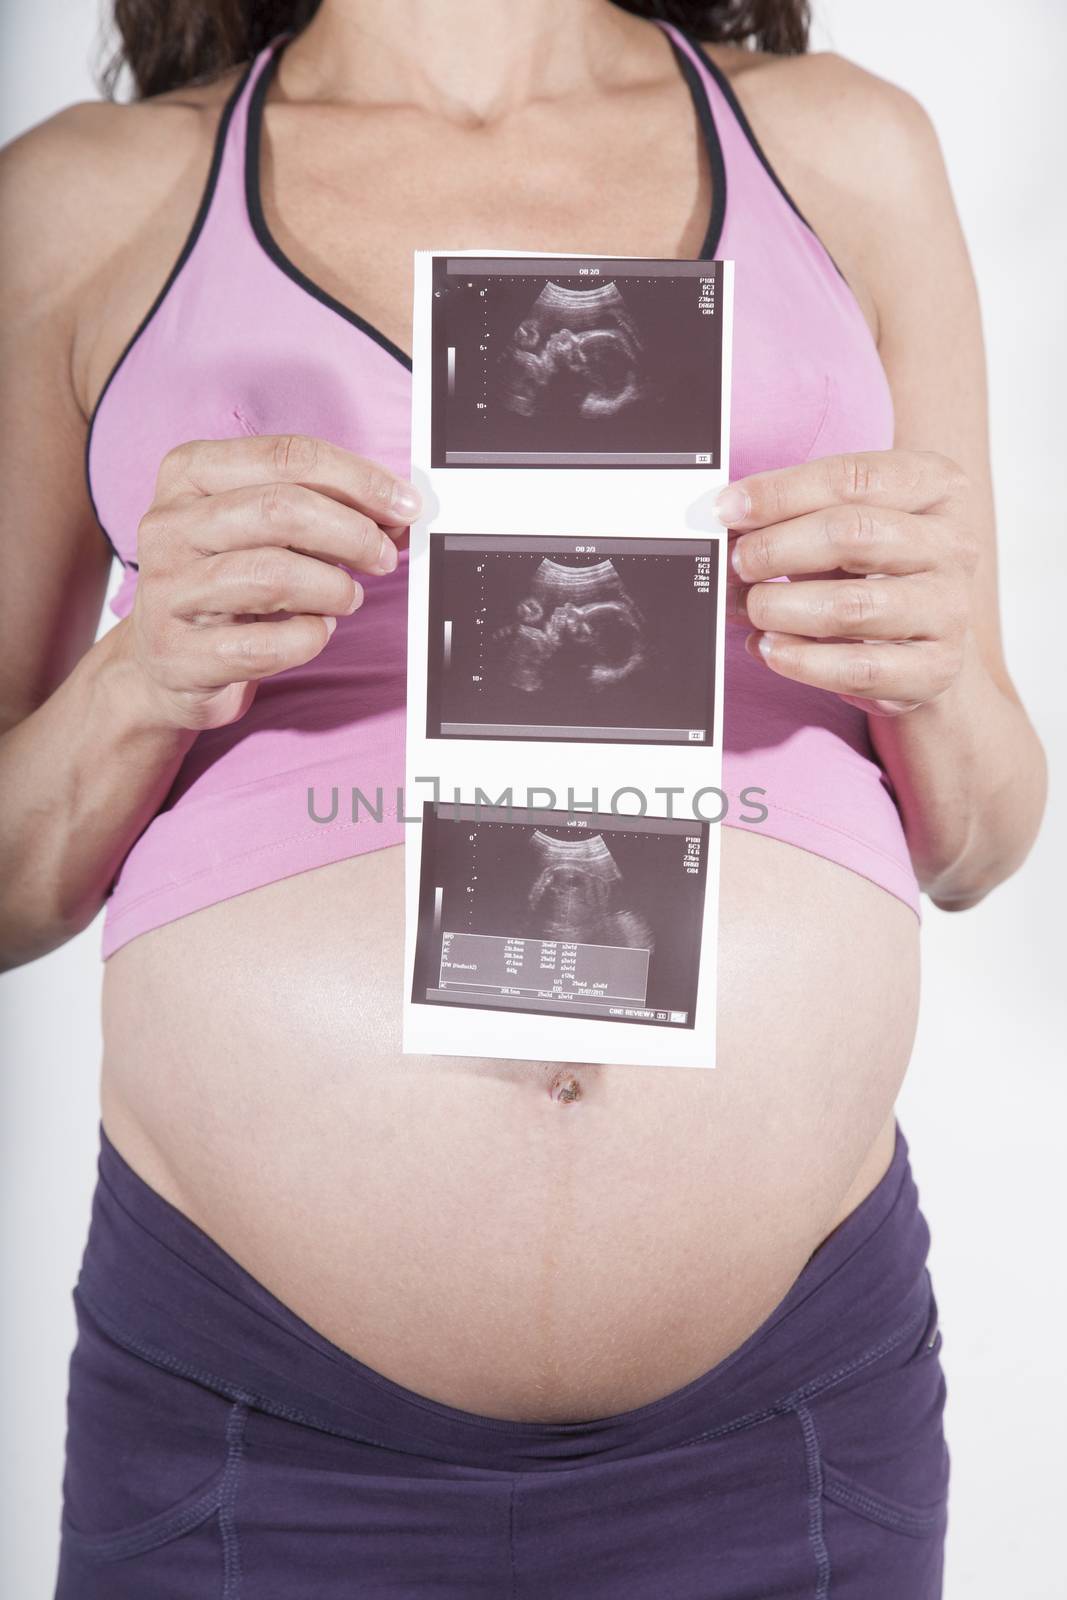 eight months pregnant woman bare belly pink shirt purple trousers with ultrasound baby scan in her hand isolated on white